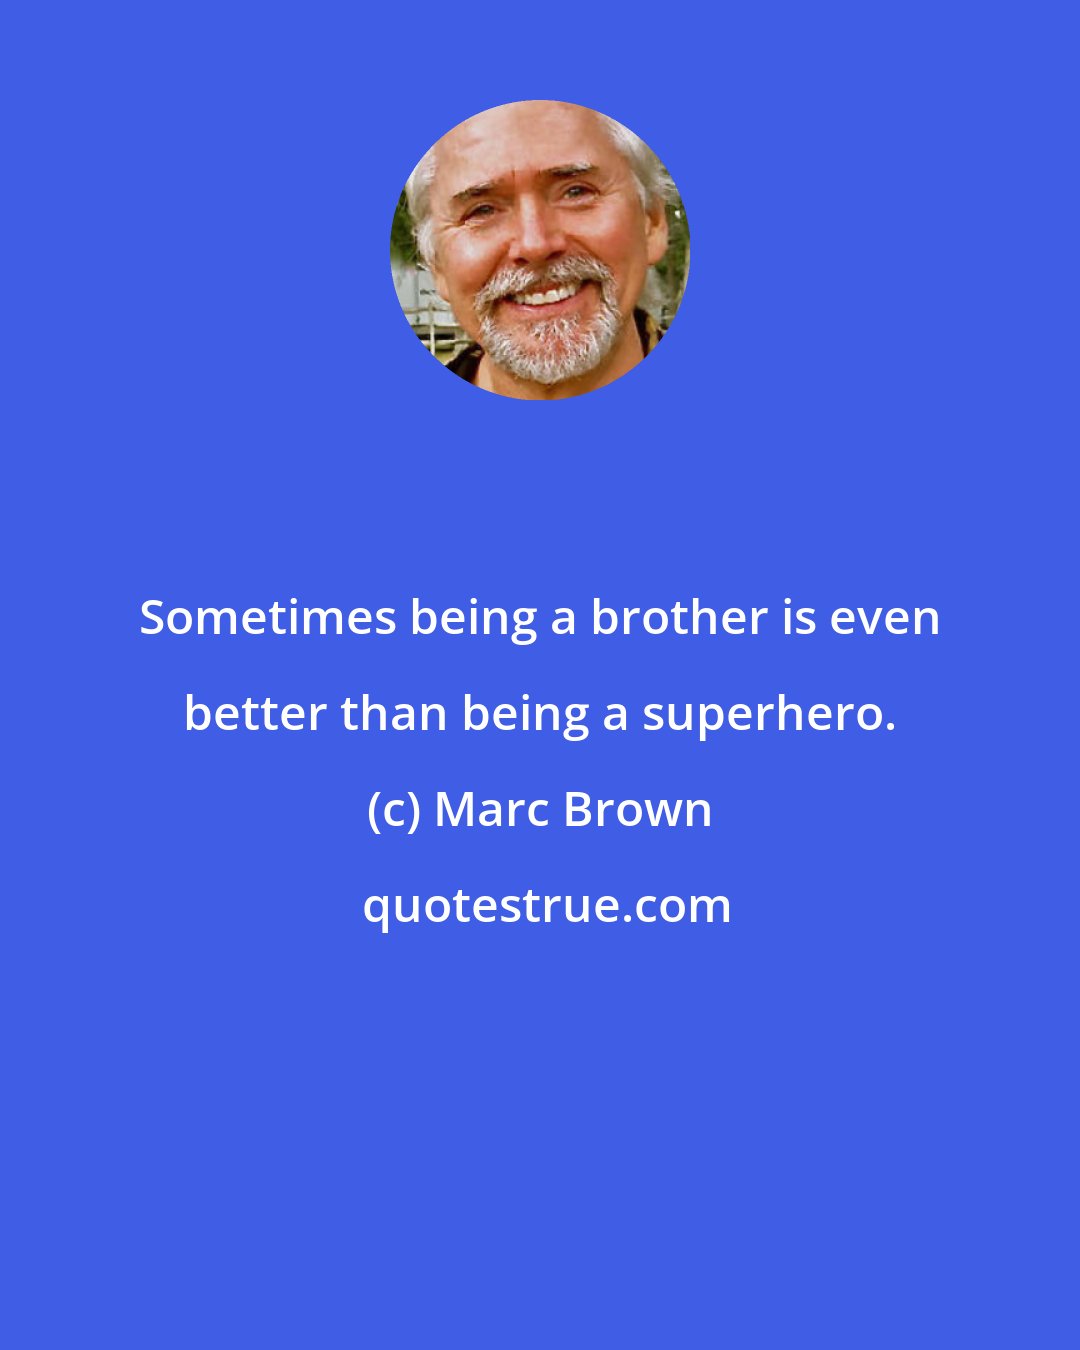 Marc Brown: Sometimes being a brother is even better than being a superhero.